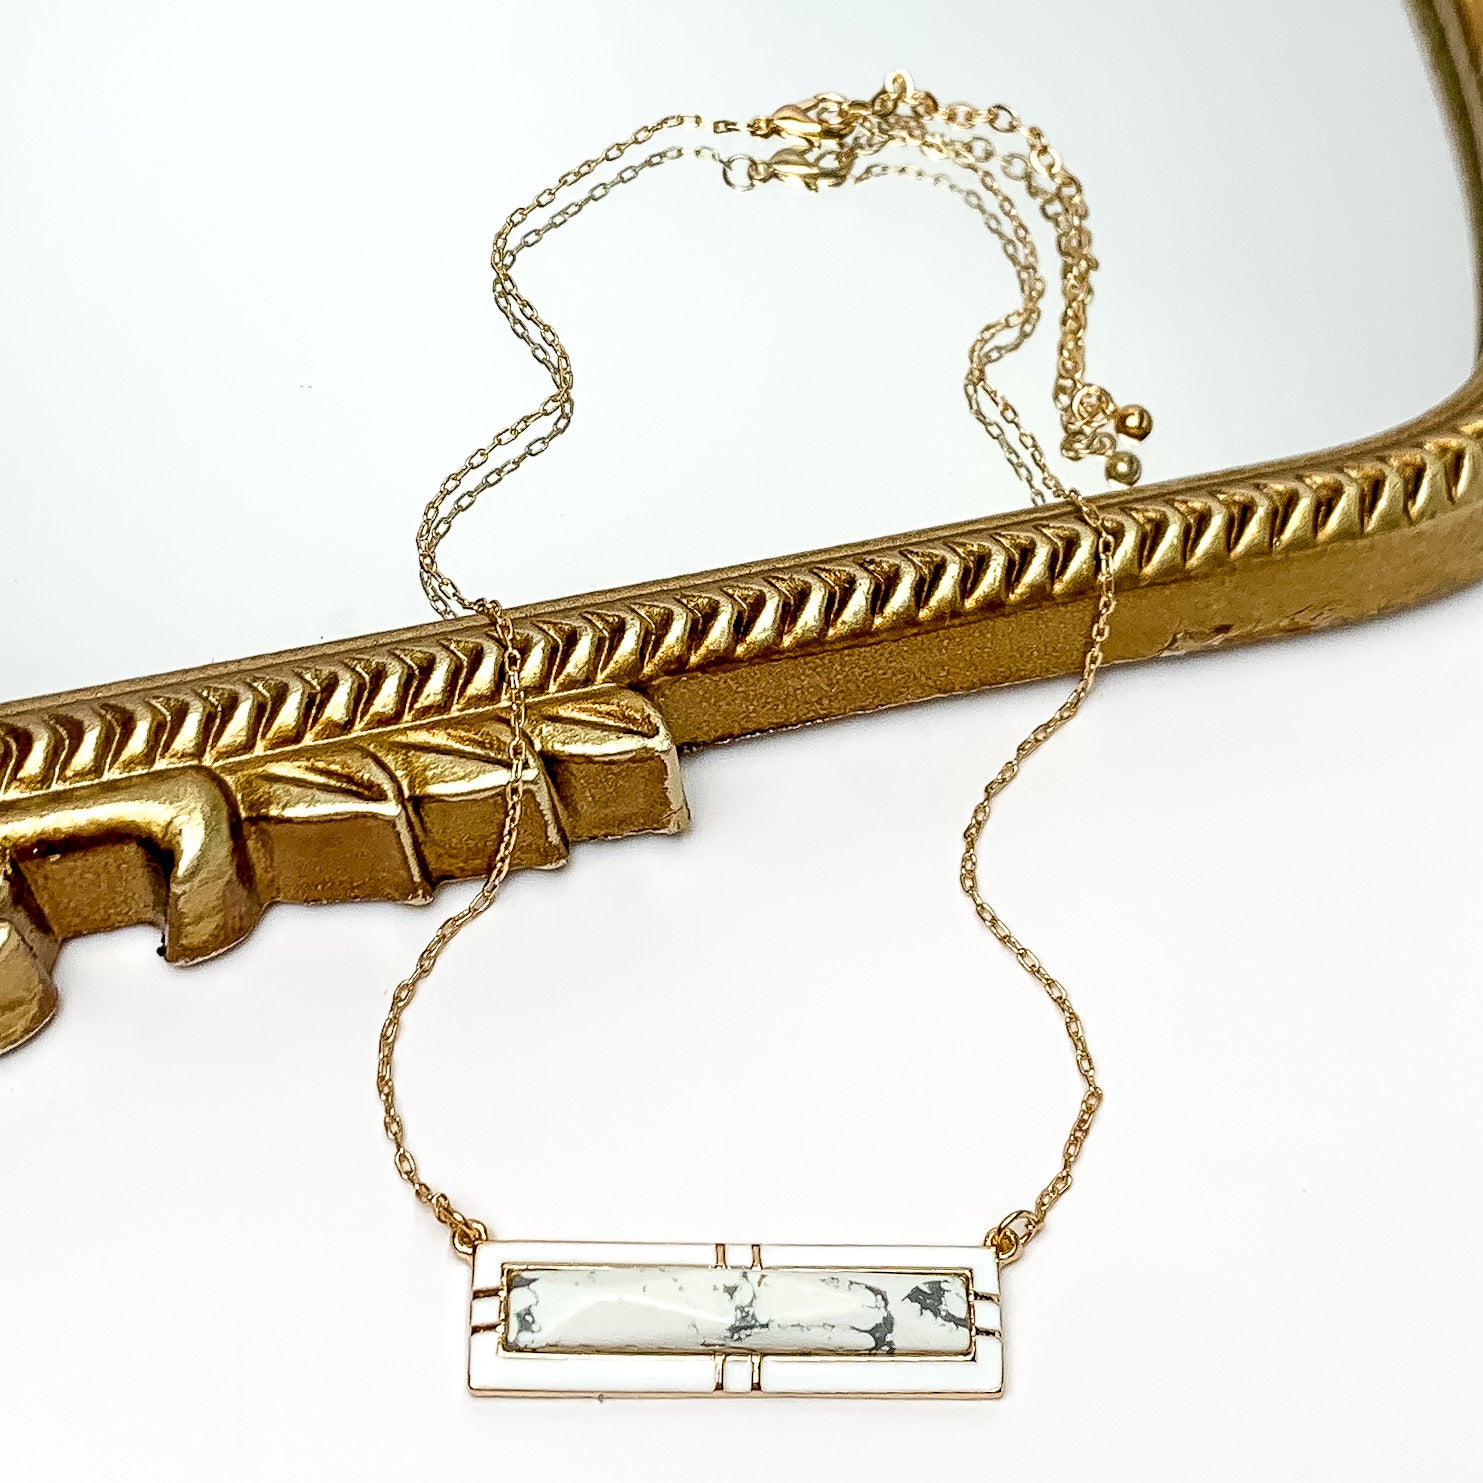 Everyday Gold Tone Chain Necklace With Rectangular Pendant in White Marble - Giddy Up Glamour Boutique